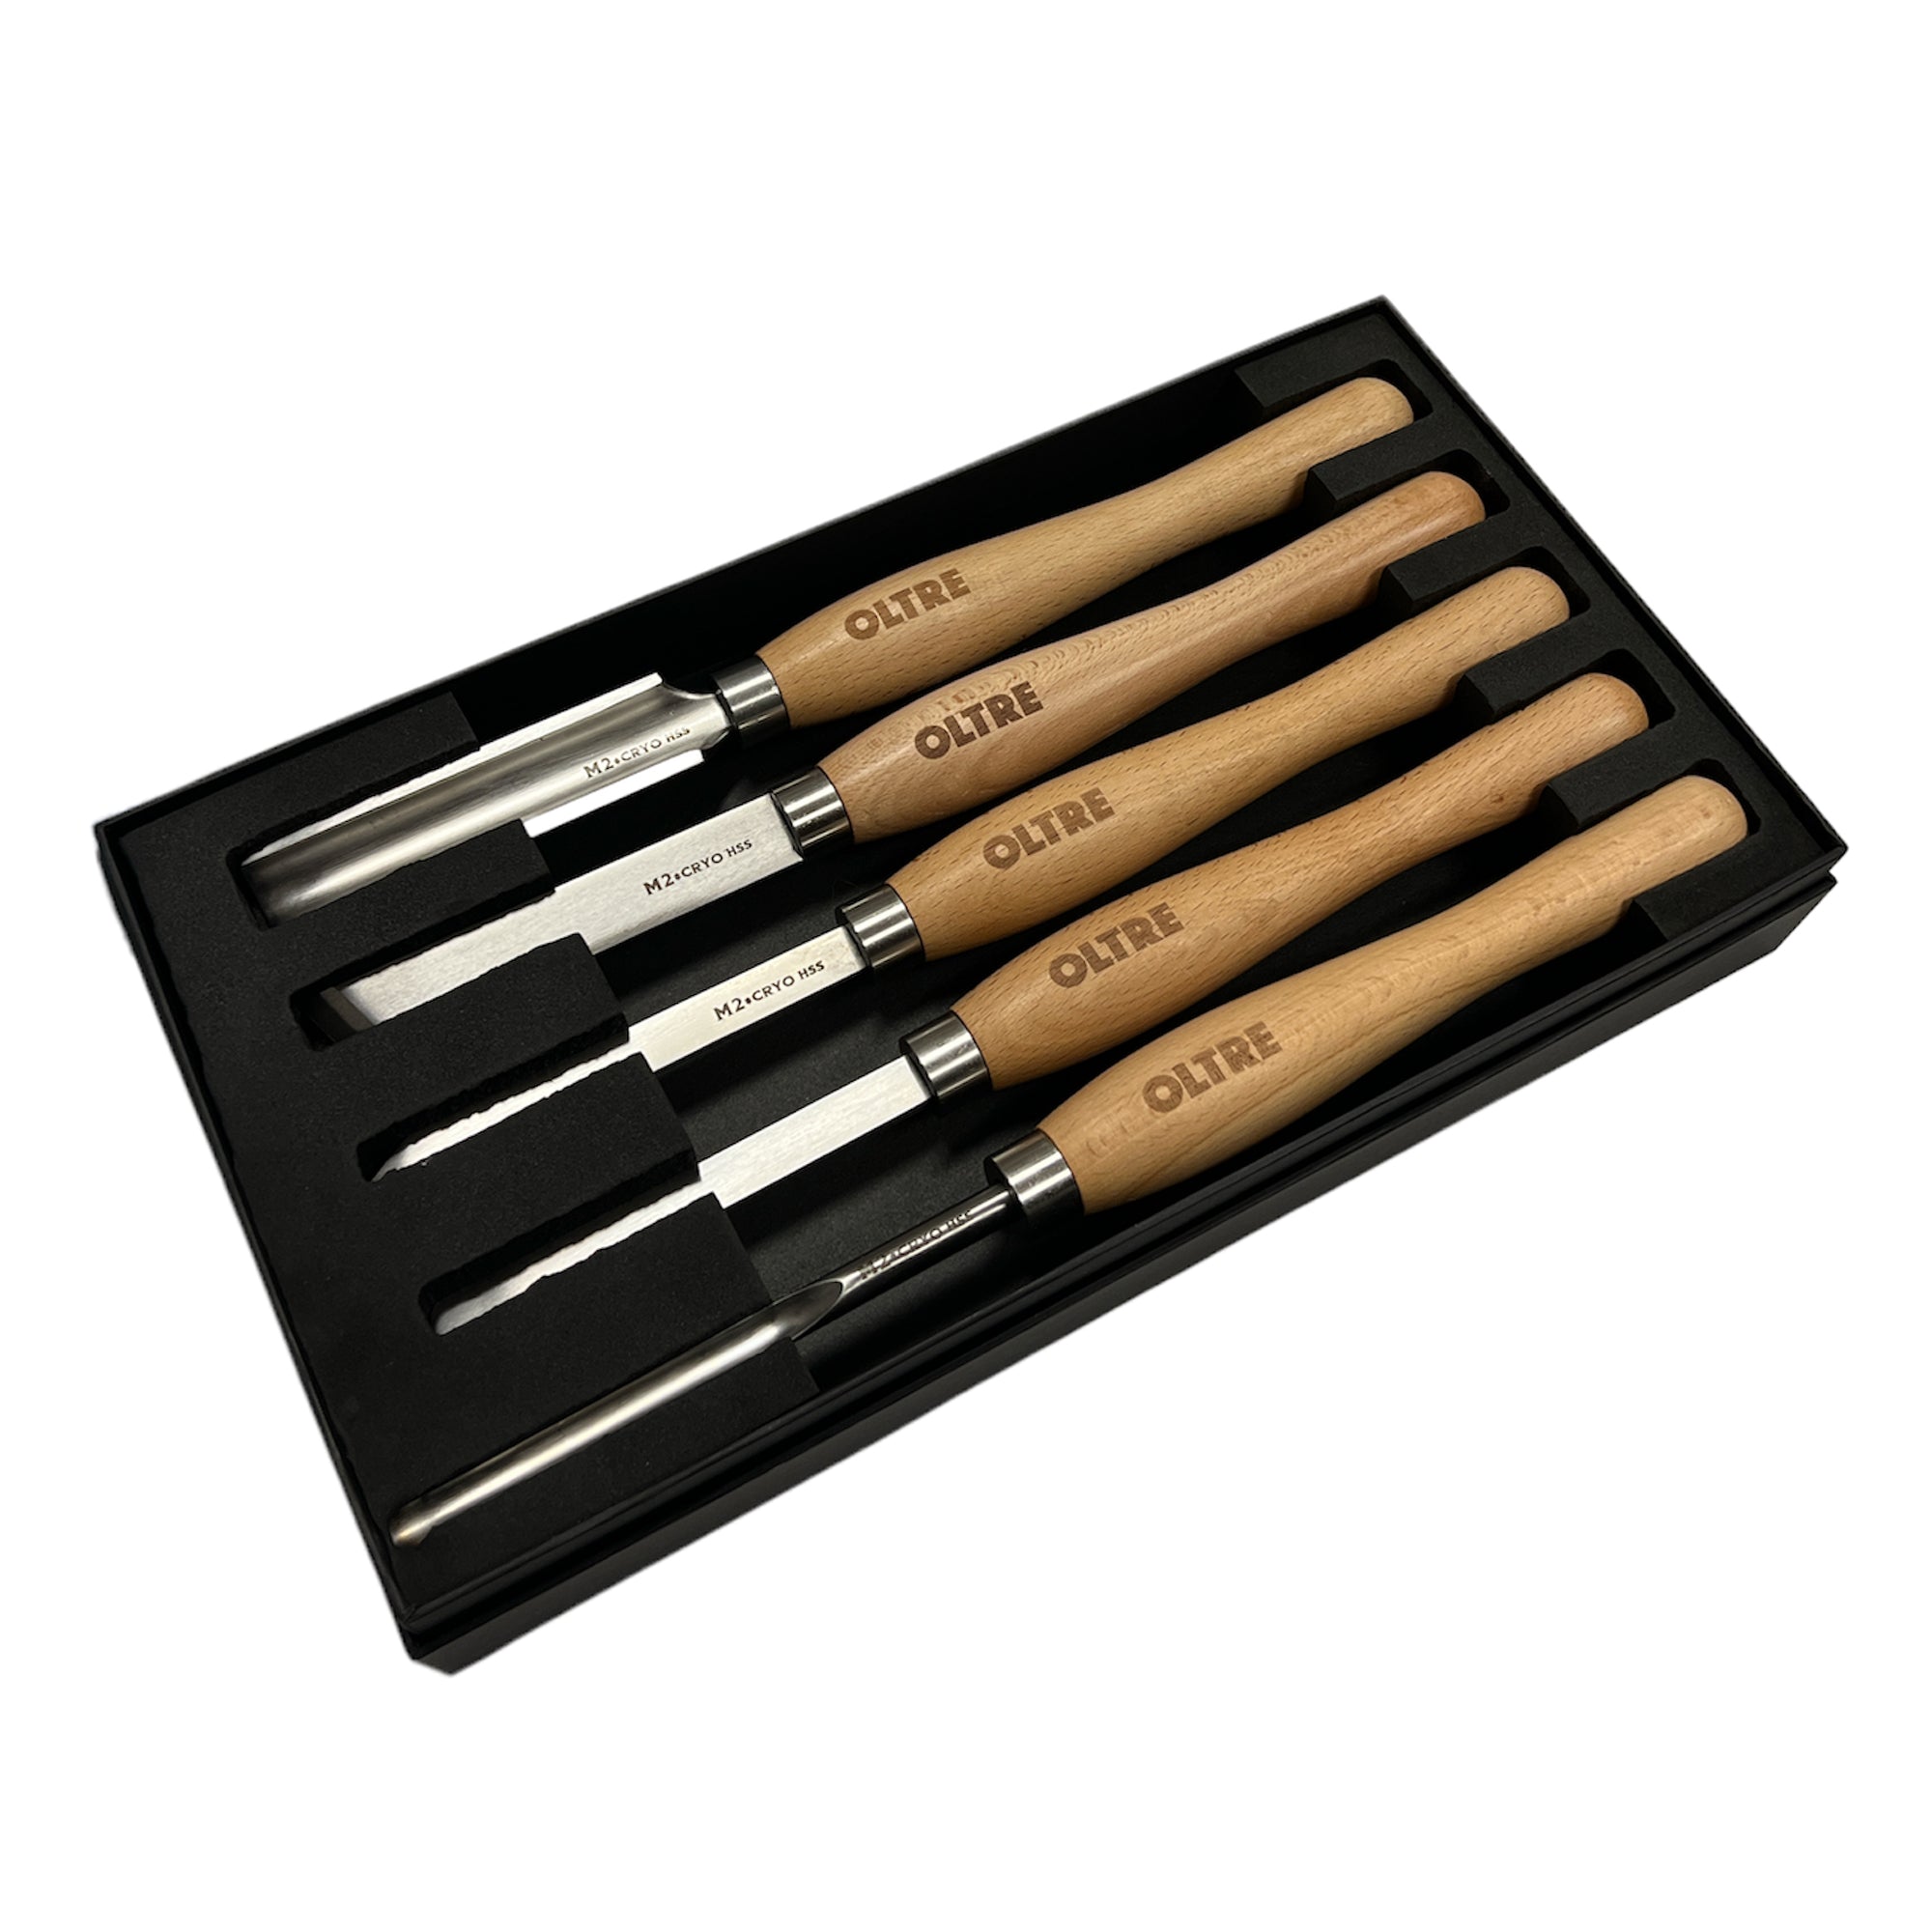 5Pce Woodturning Chisel Tool M2 CRYO HSS (5 Small Turning Tool) Set by Oltre